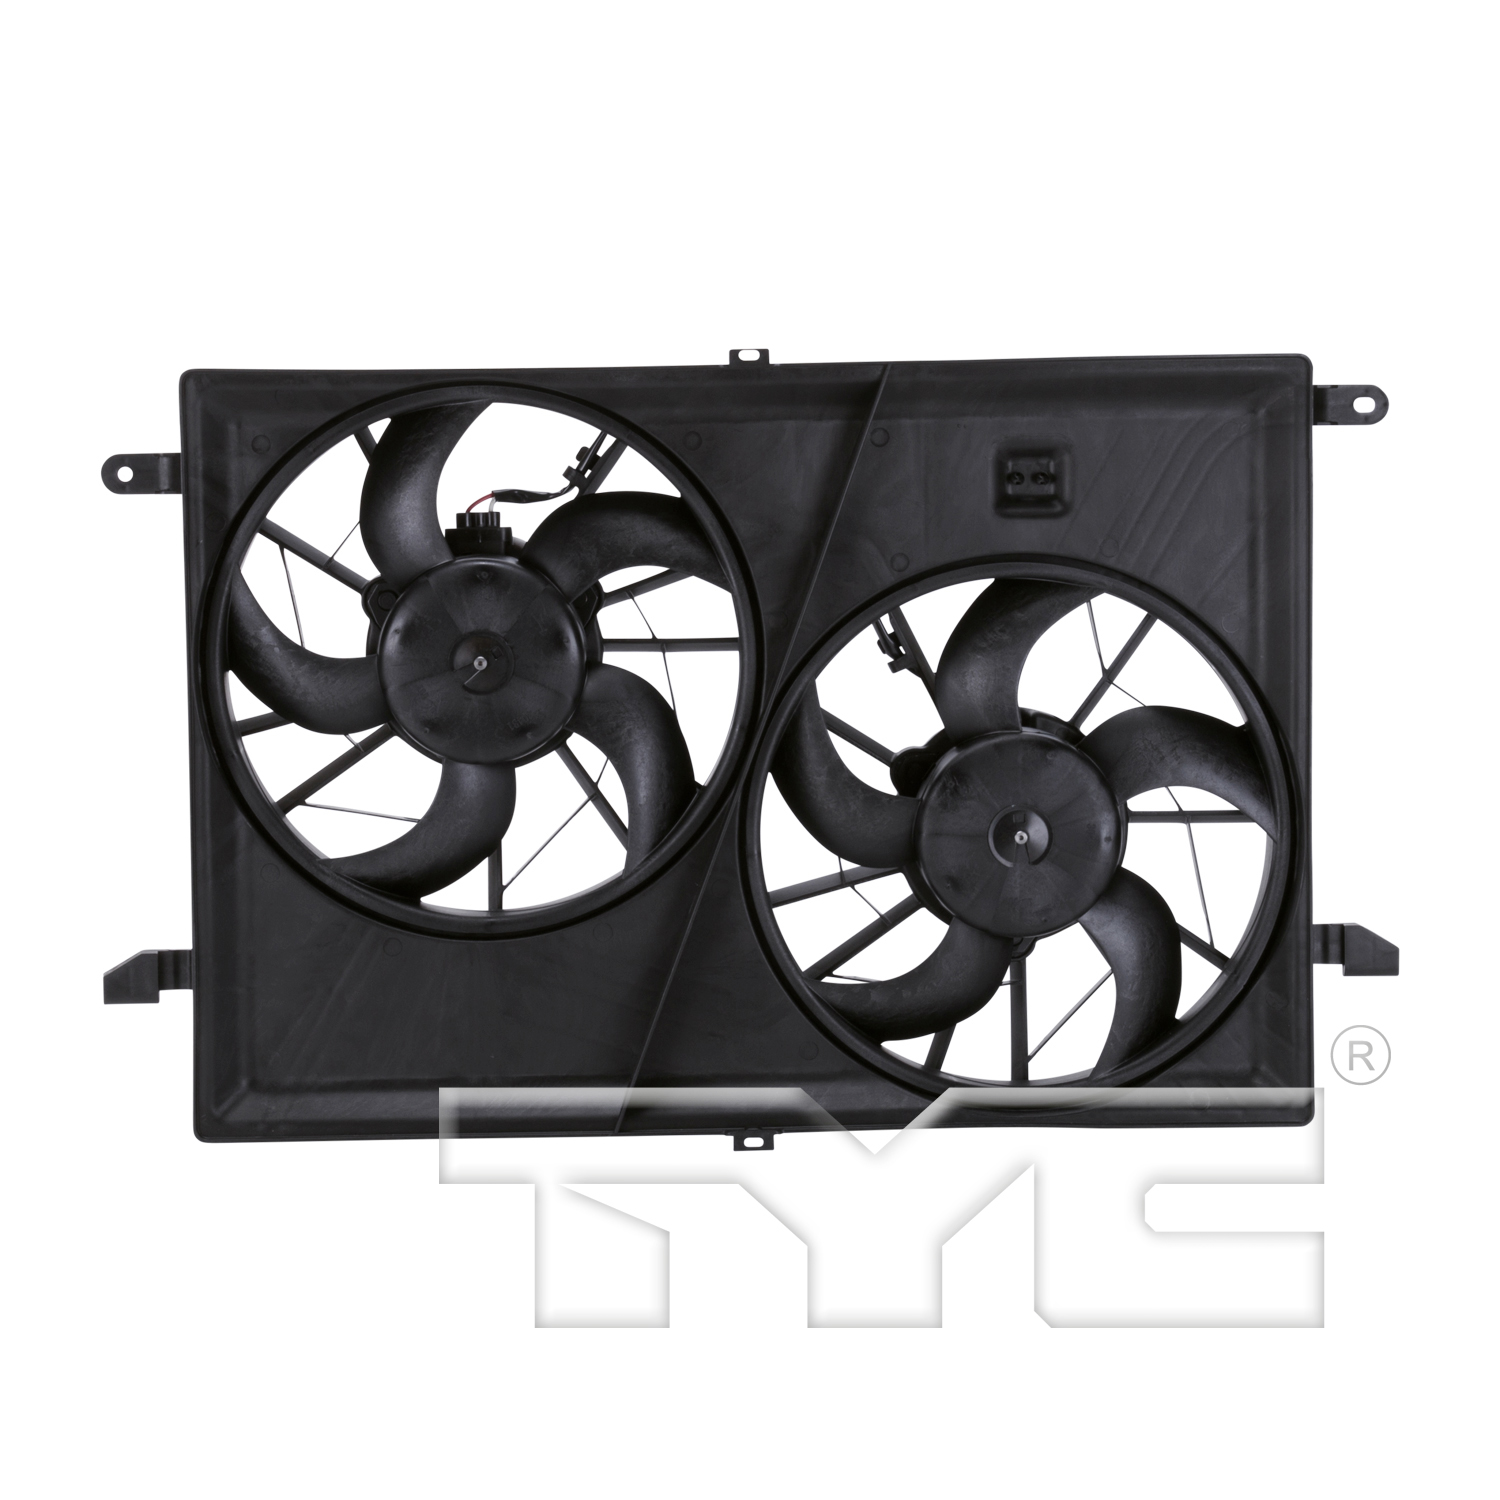 Aftermarket FAN ASSEMBLY/FAN SHROUDS for GMC - ACADIA LIMITED, ACADIA LIMITED,17-17,Radiator cooling fan assy